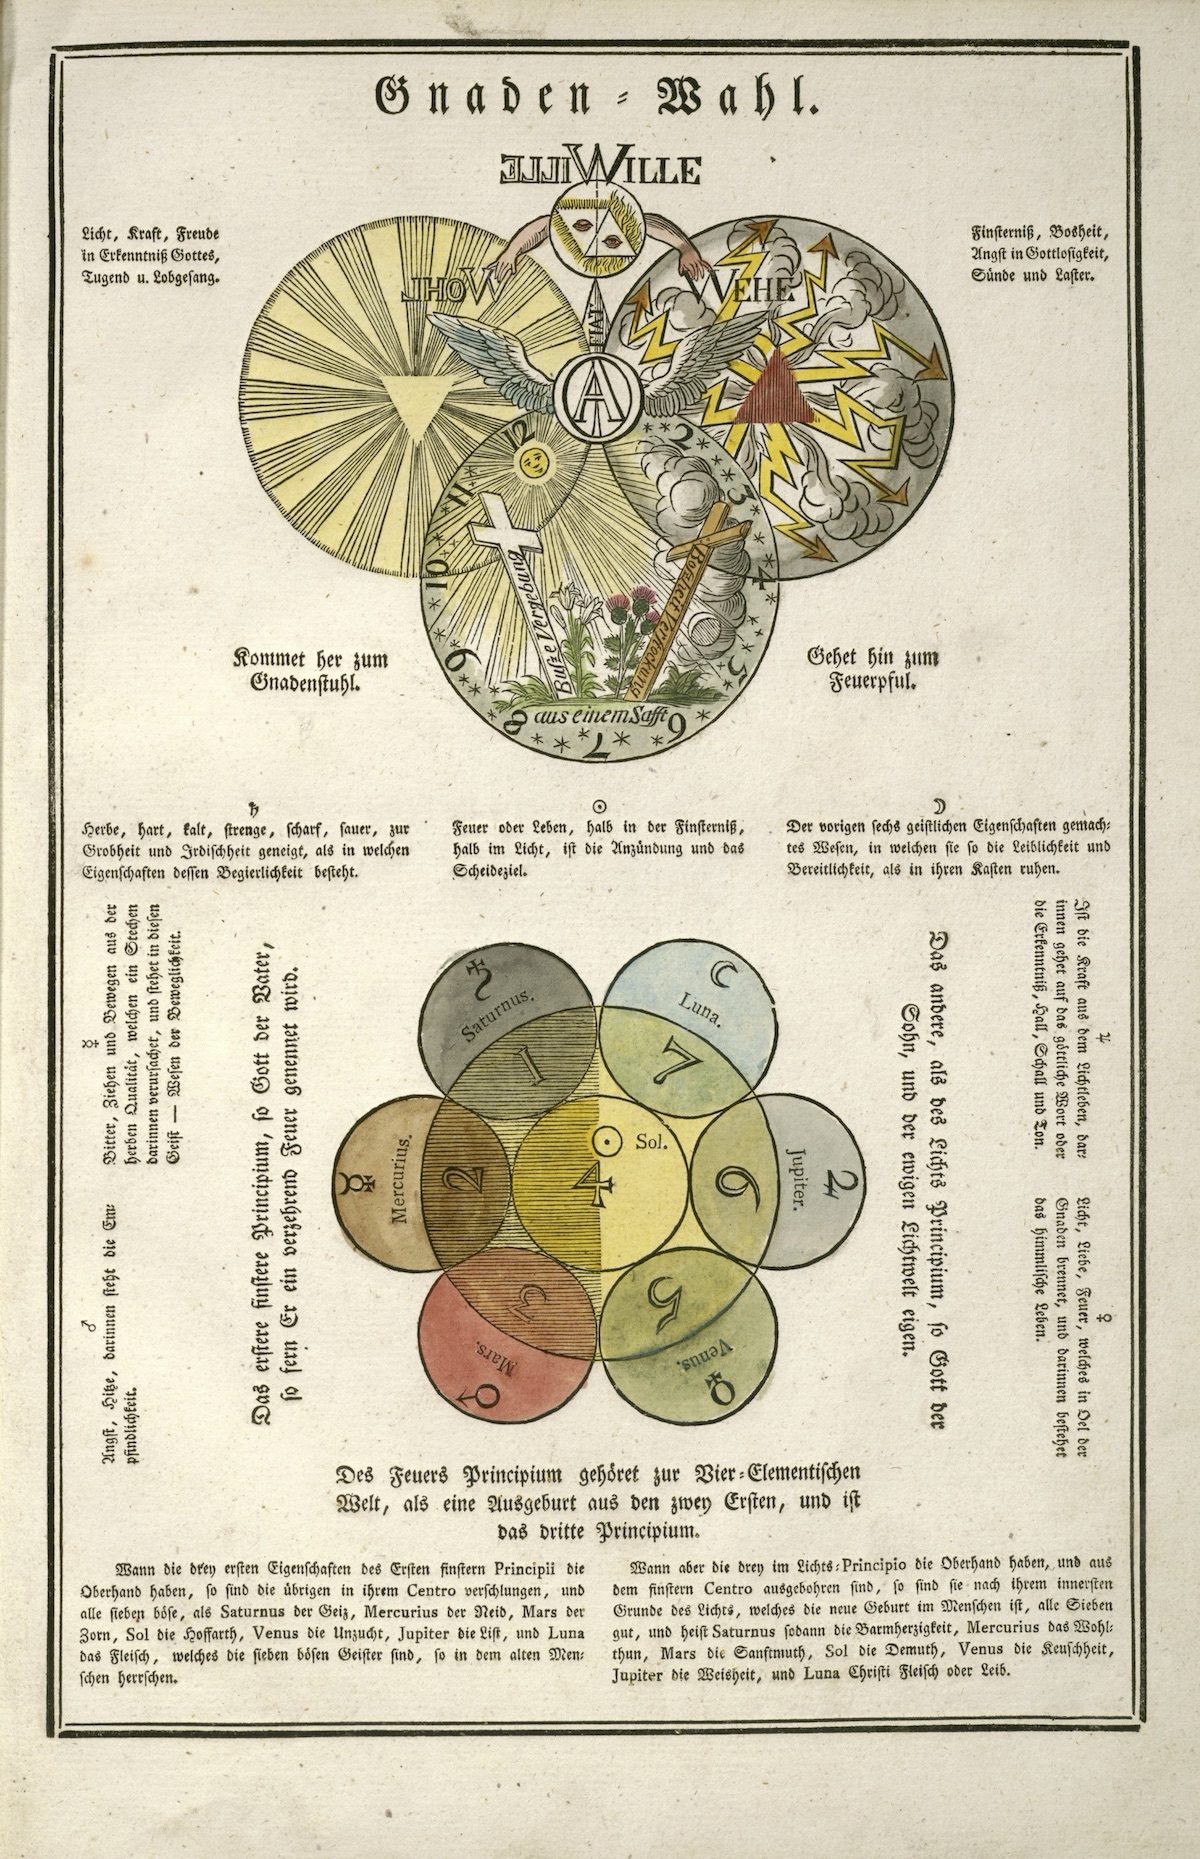 Secret Symbols of the Rosicrucians from the 16th and 17th Centuries